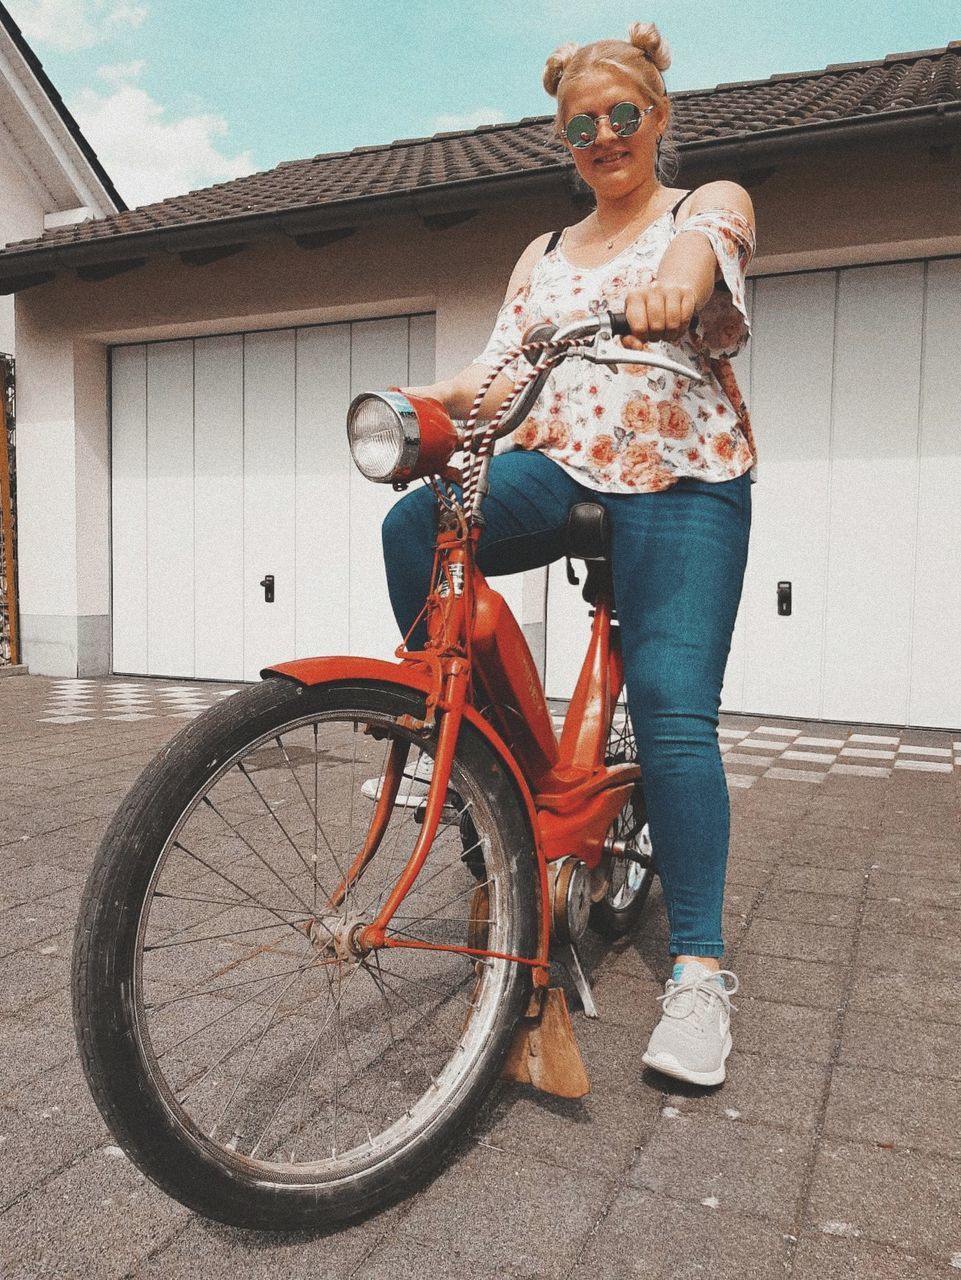 full length, real people, casual clothing, one person, bicycle, lifestyles, architecture, portrait, transportation, building exterior, leisure activity, land vehicle, built structure, looking at camera, women, day, standing, young adult, fashion, outdoors, hairstyle, beautiful woman